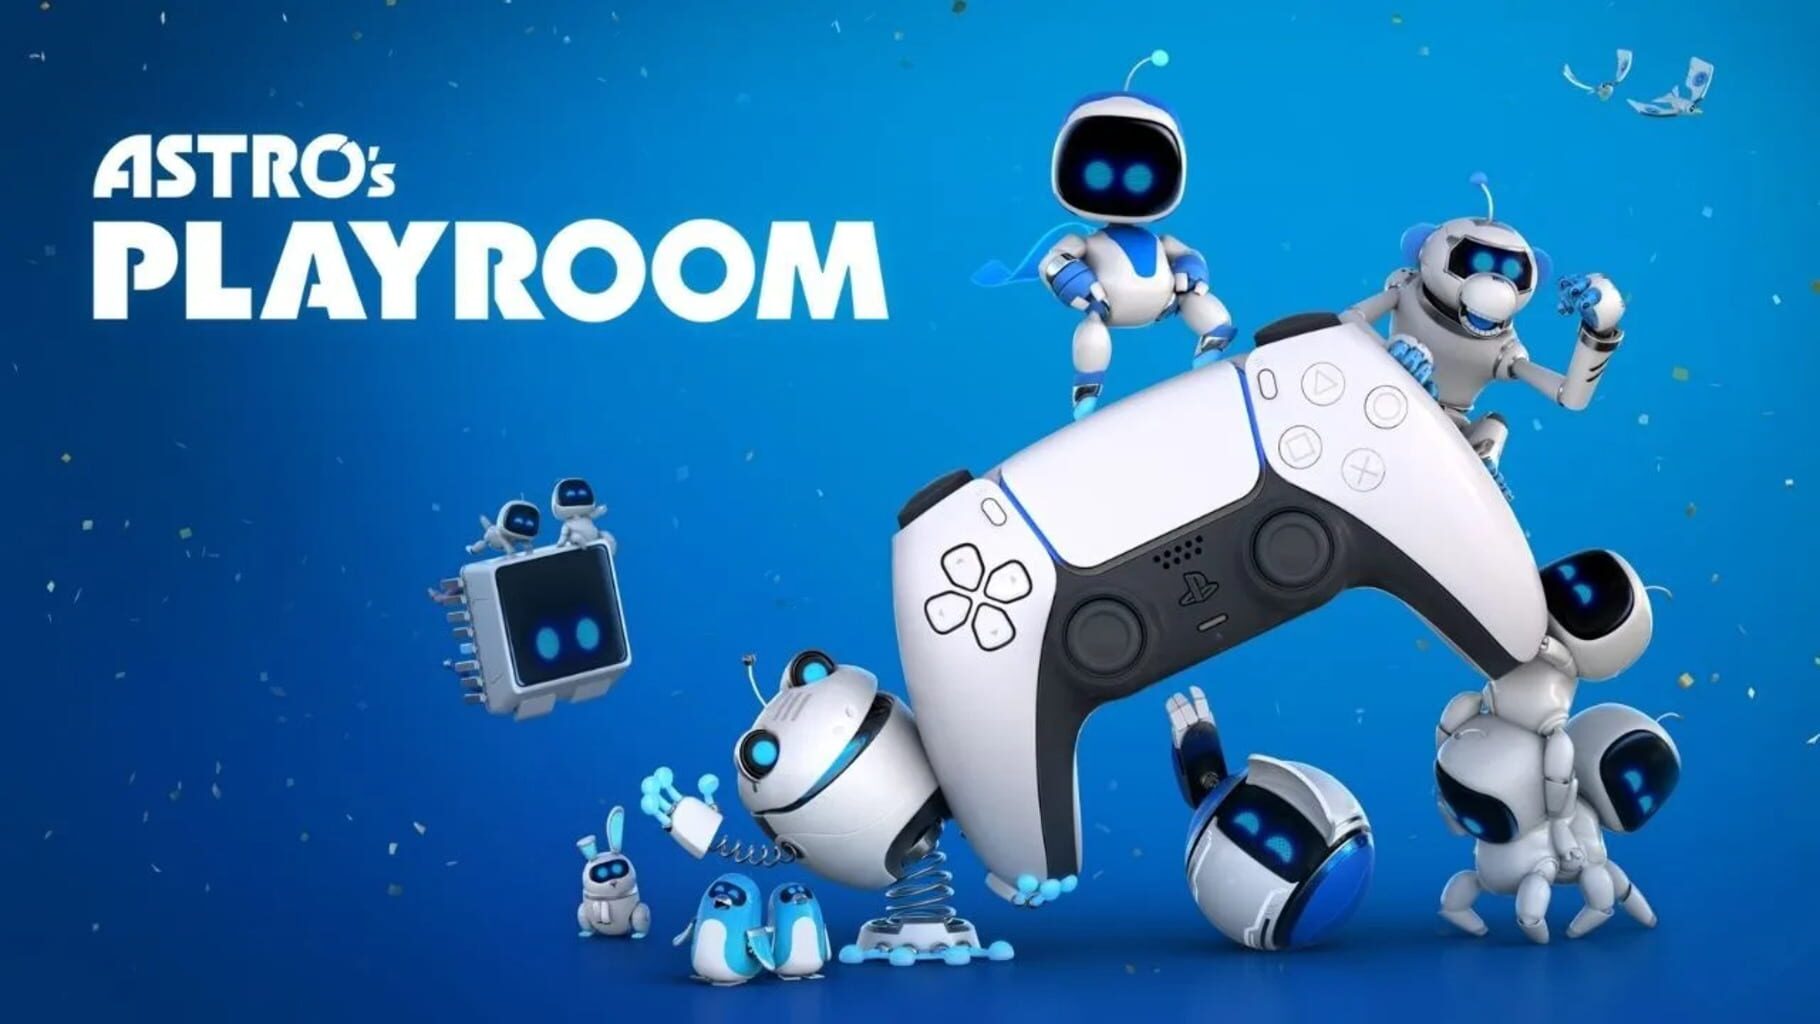 Artwork for Astro's Playroom